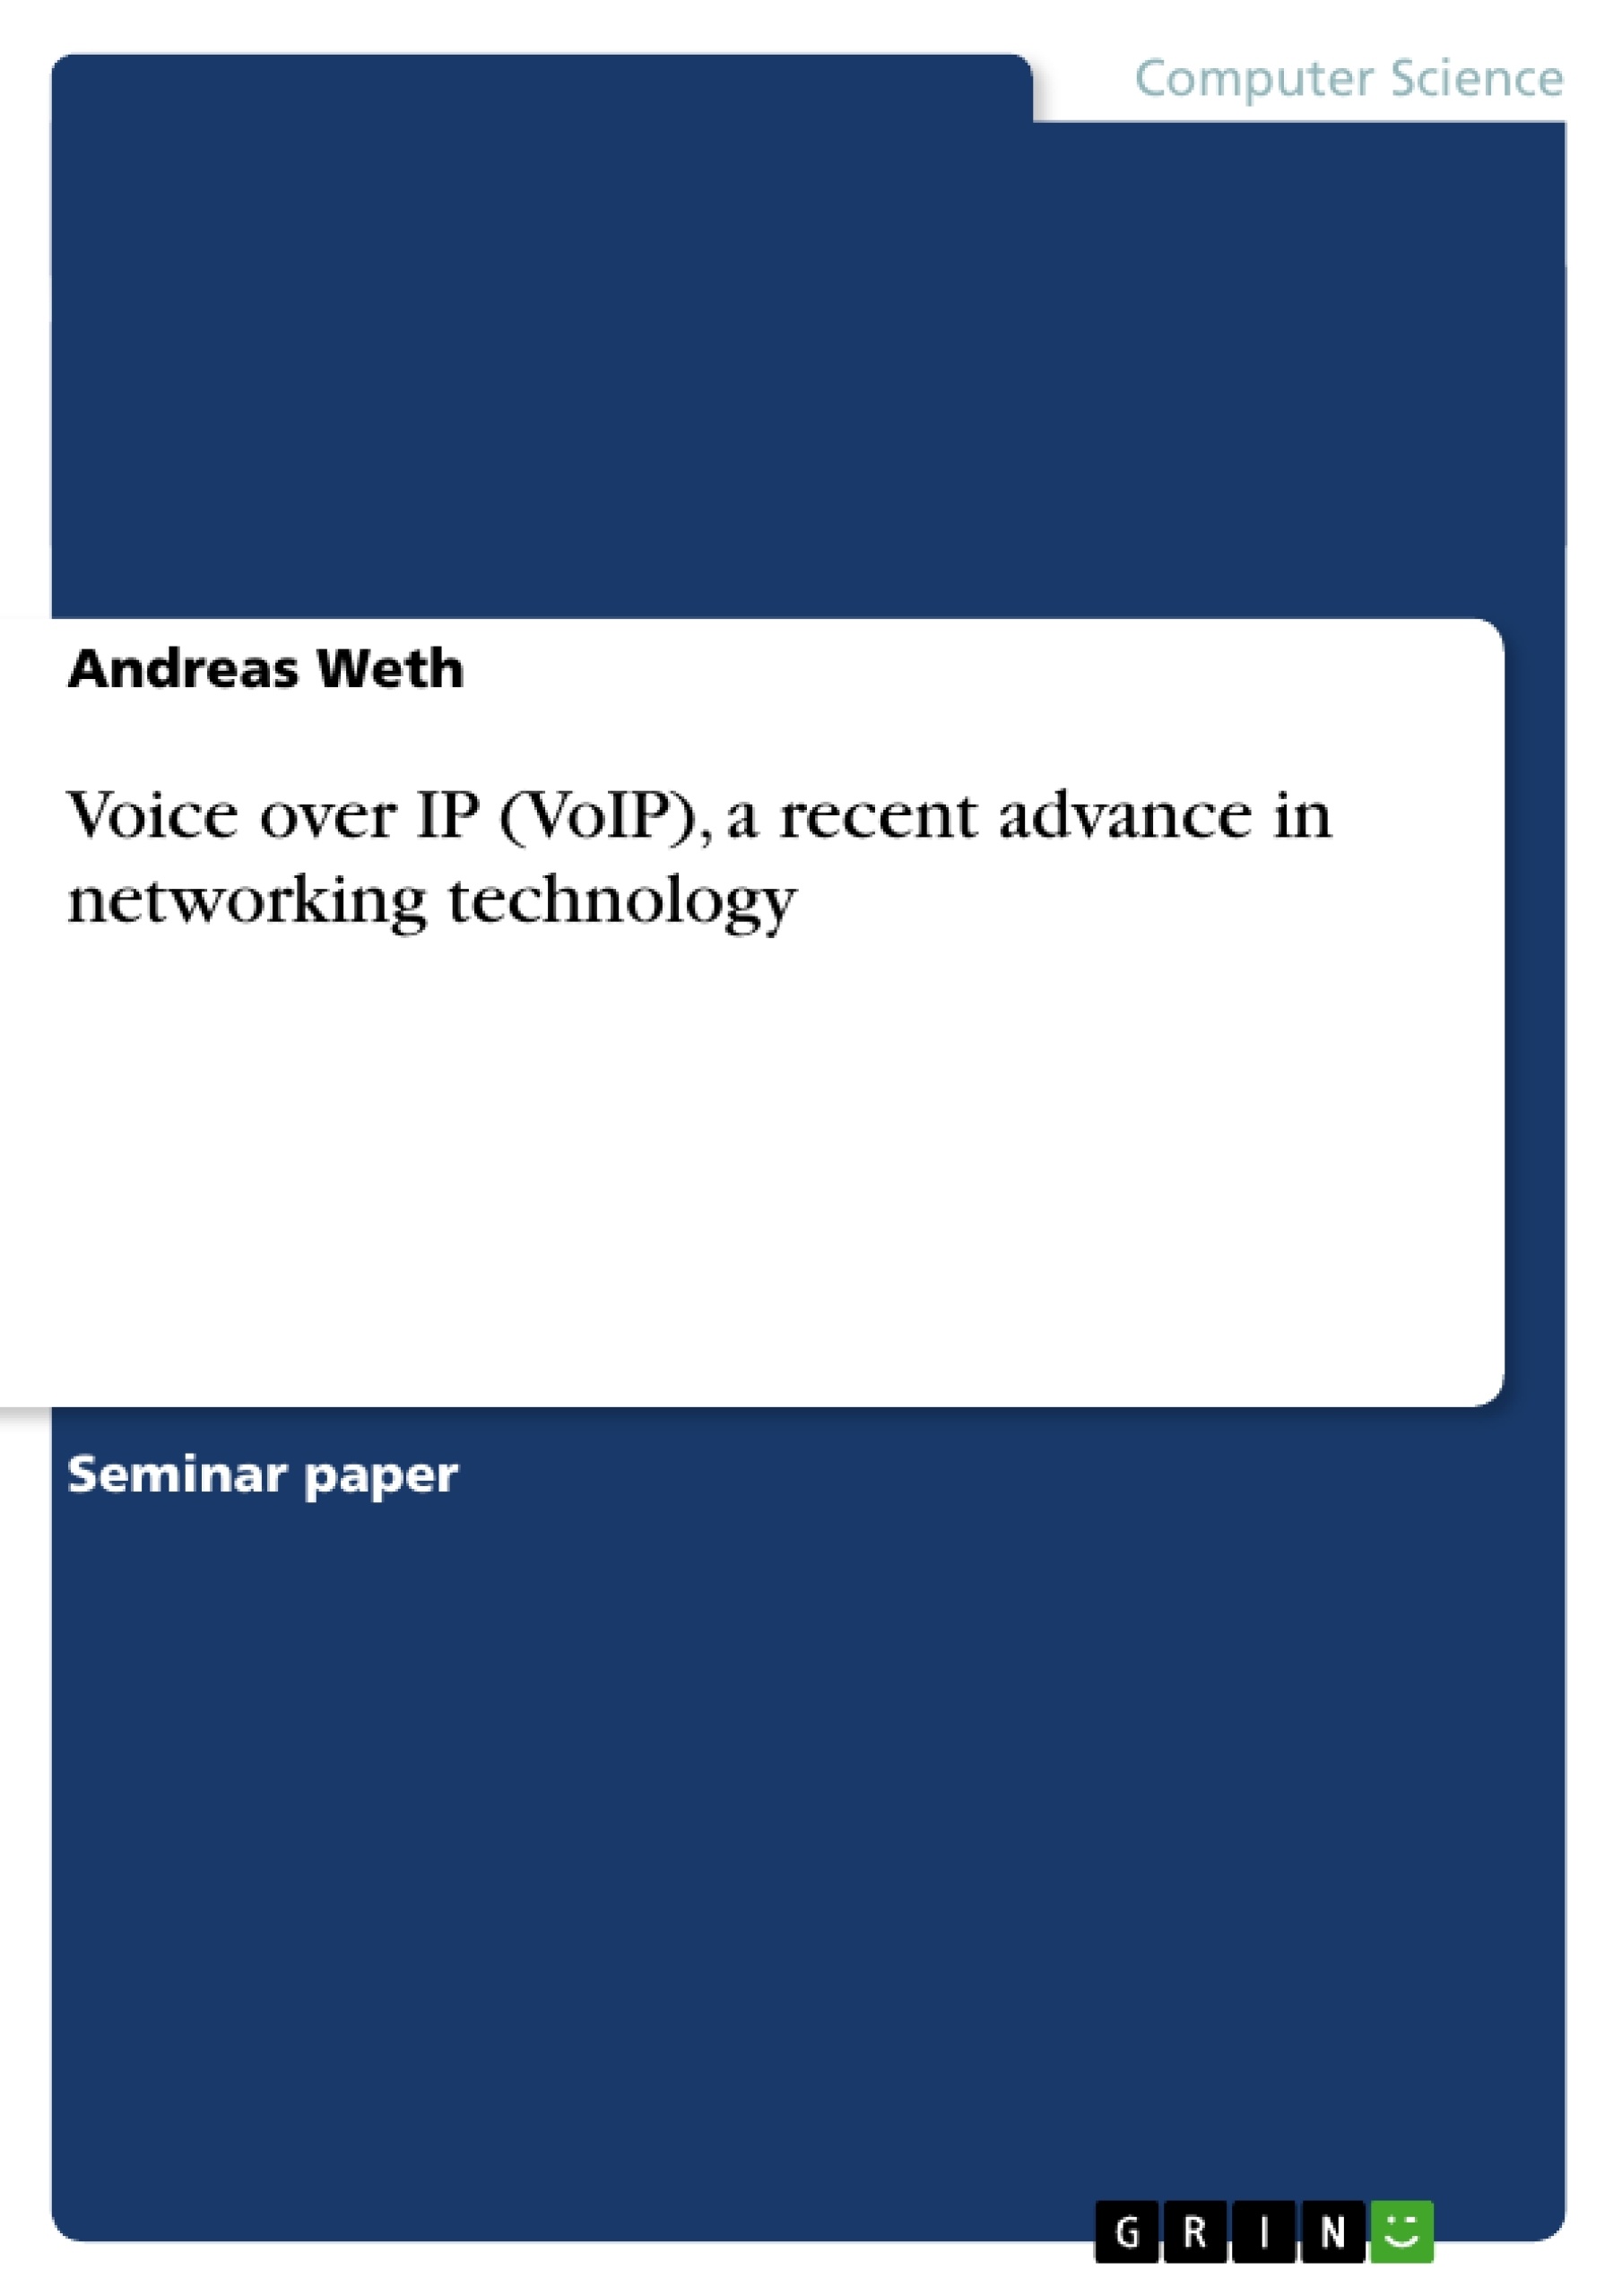 Title: Voice over IP (VoIP), a recent advance in networking technology